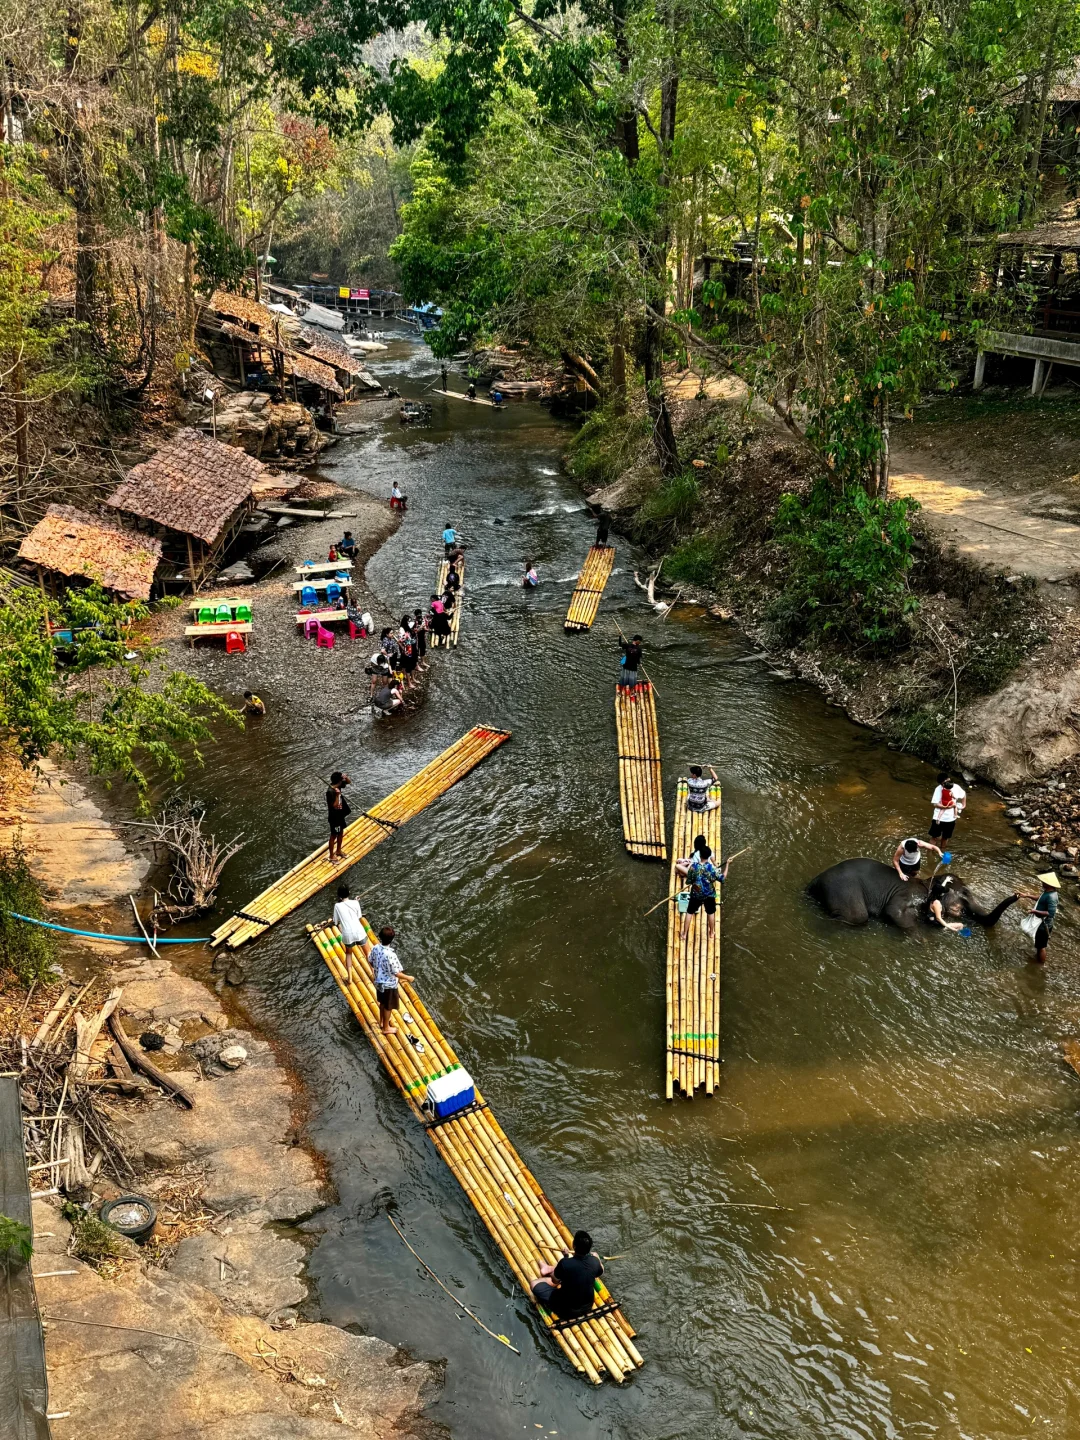 ChiangMai-How to enjoy the Elephant Camp and Bamboo Rafting in Chiang Mai? This is enough